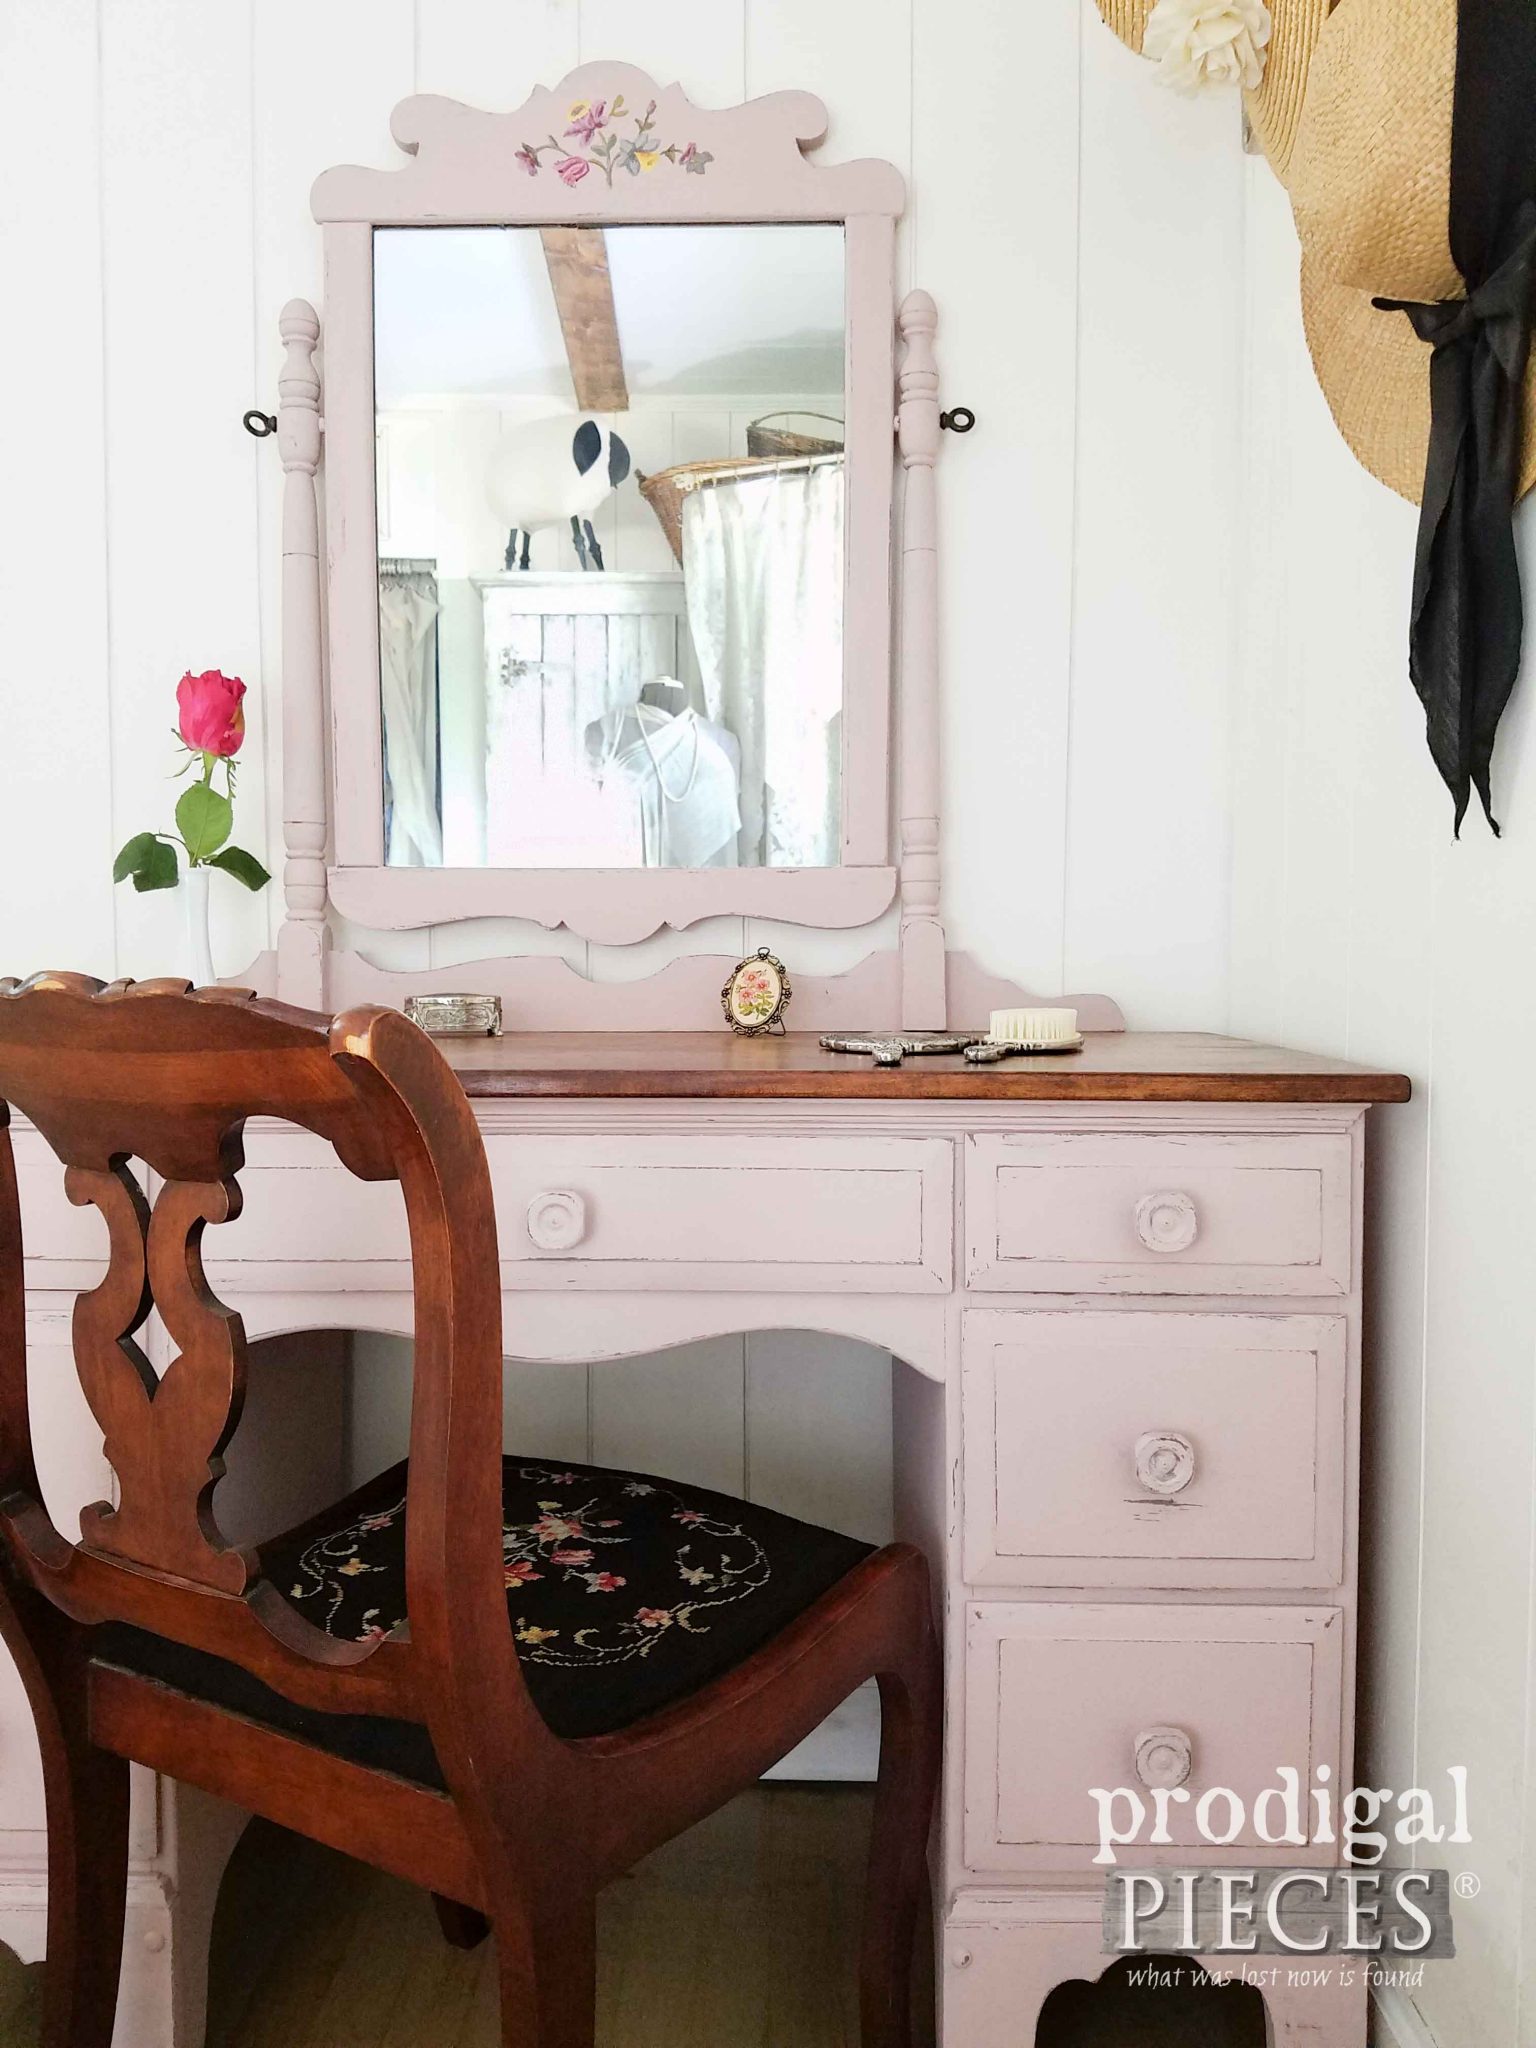 Tea Rose Pink Vintage Vanity with Needlepoint Chair by Prodigal Pieces | prodigalpieces.com